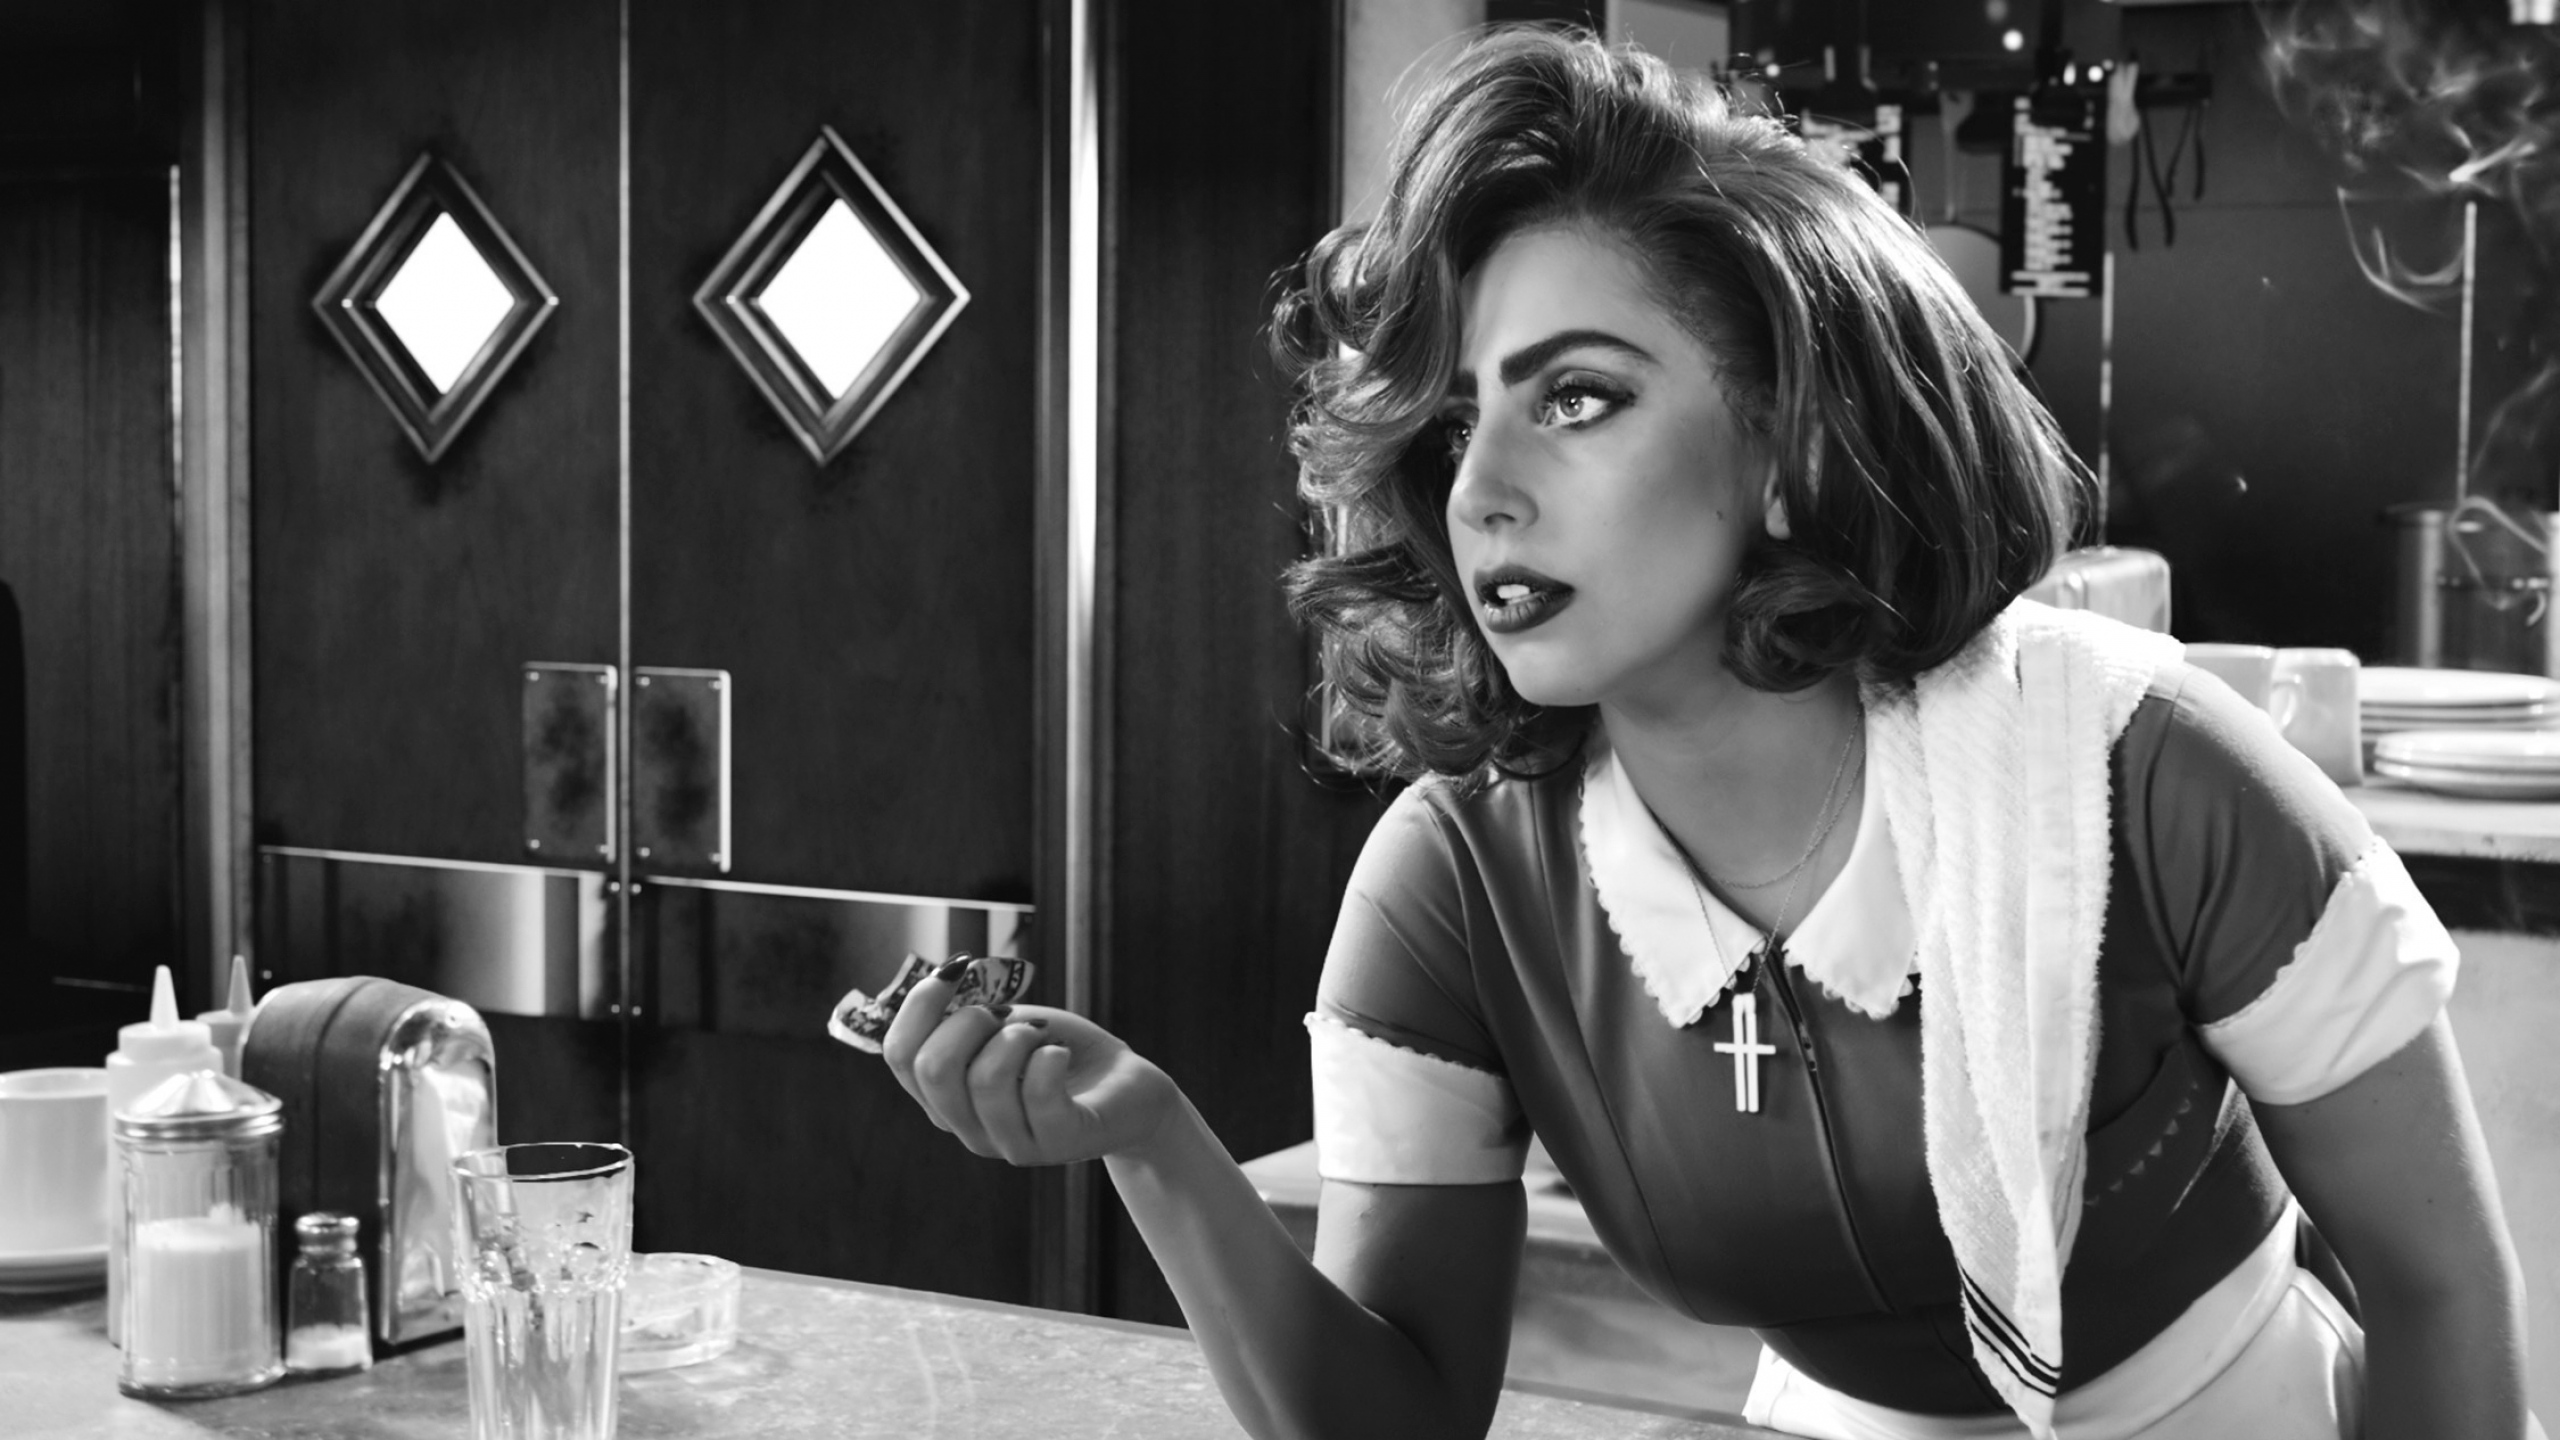 Download Wallpaper 2560x1440 Sin city a dame to kill for, Lady ...